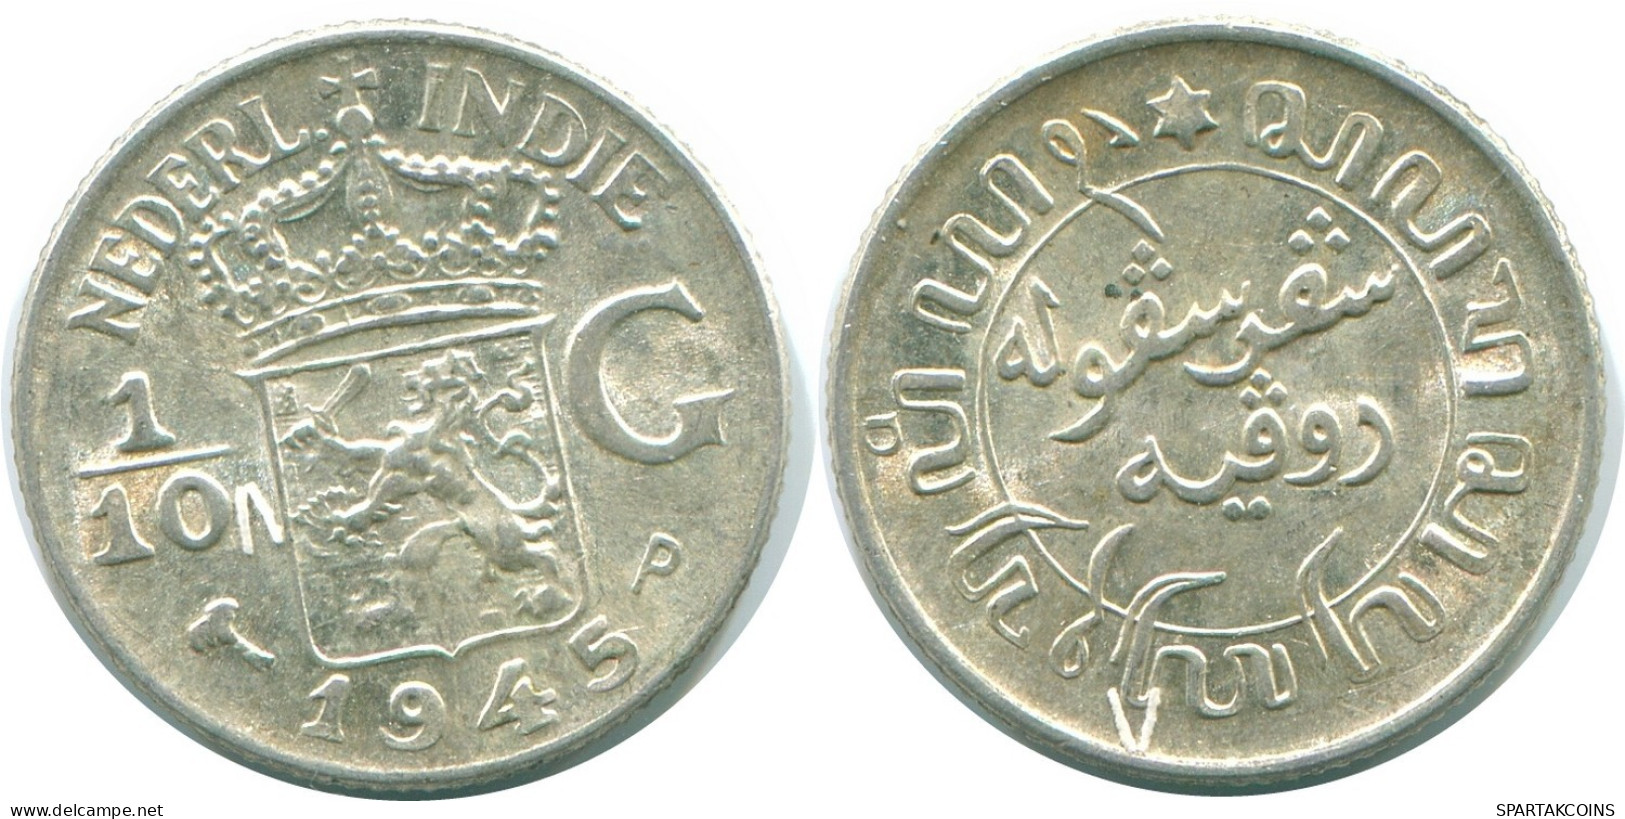 1/10 GULDEN 1945 P NETHERLANDS EAST INDIES SILVER Colonial Coin #NL14017.3.U.A - Dutch East Indies